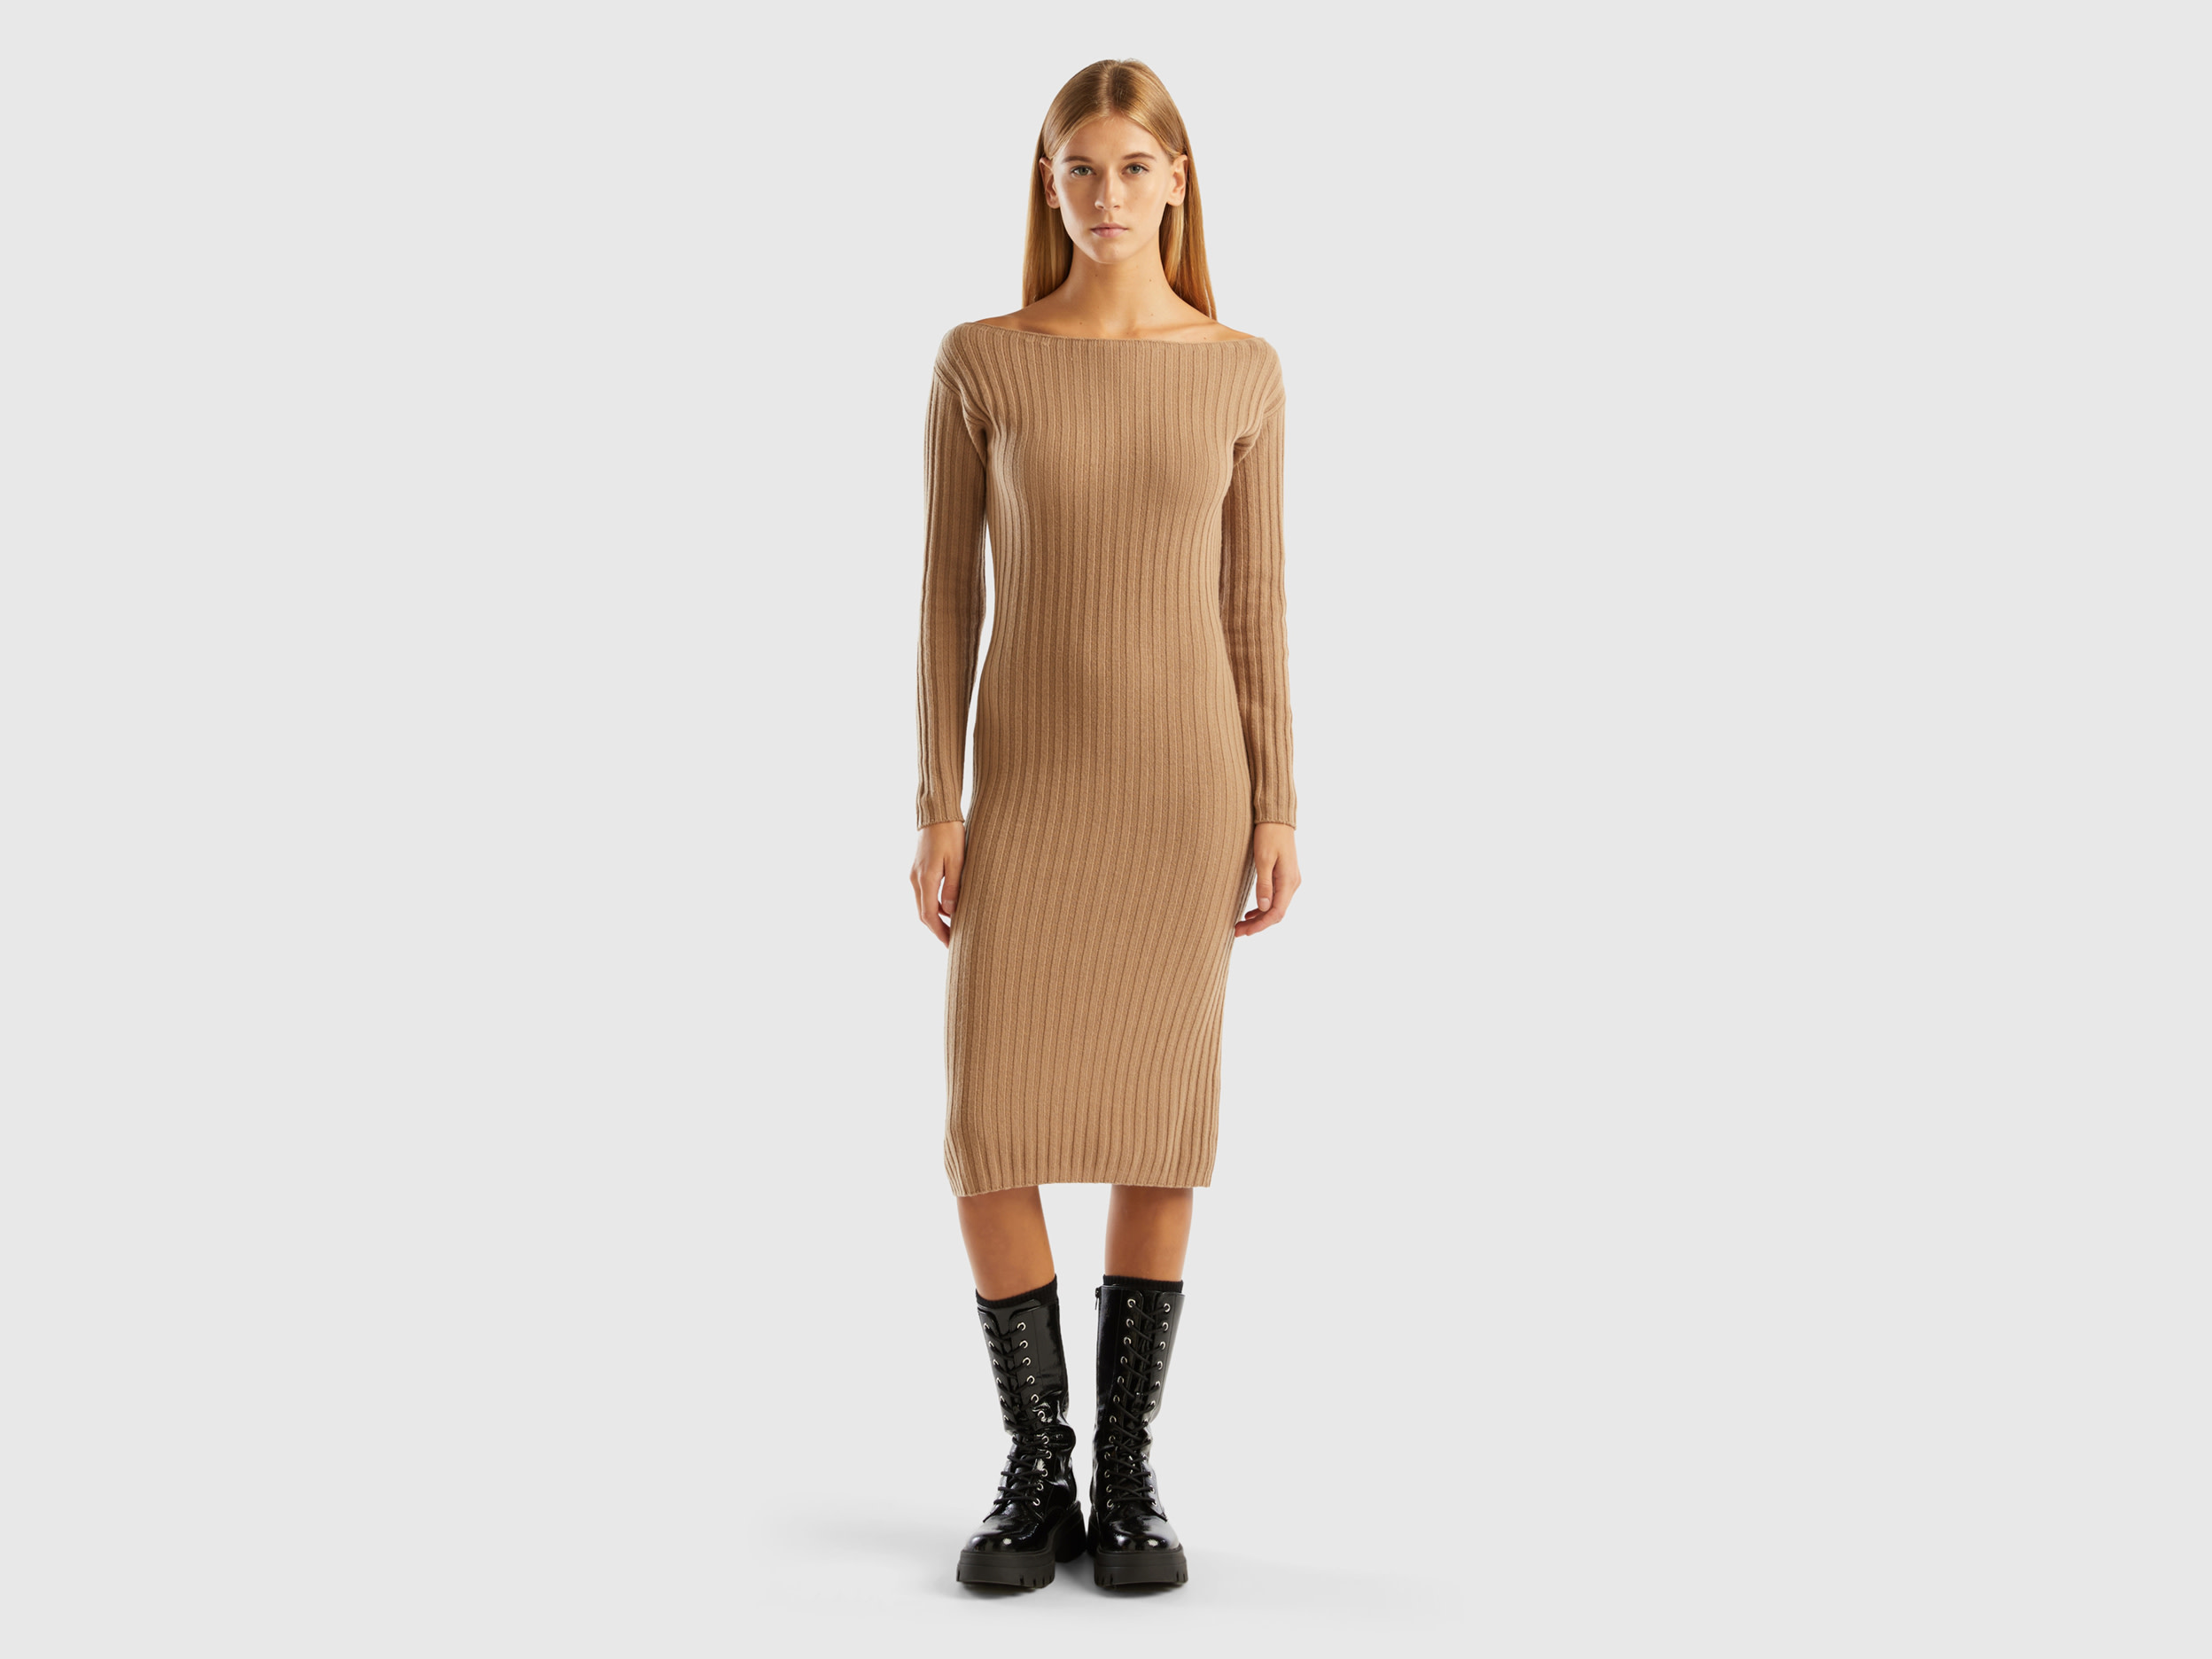 Benetton, Knit Dress With Boat Neck, size XS-S, Camel, Women